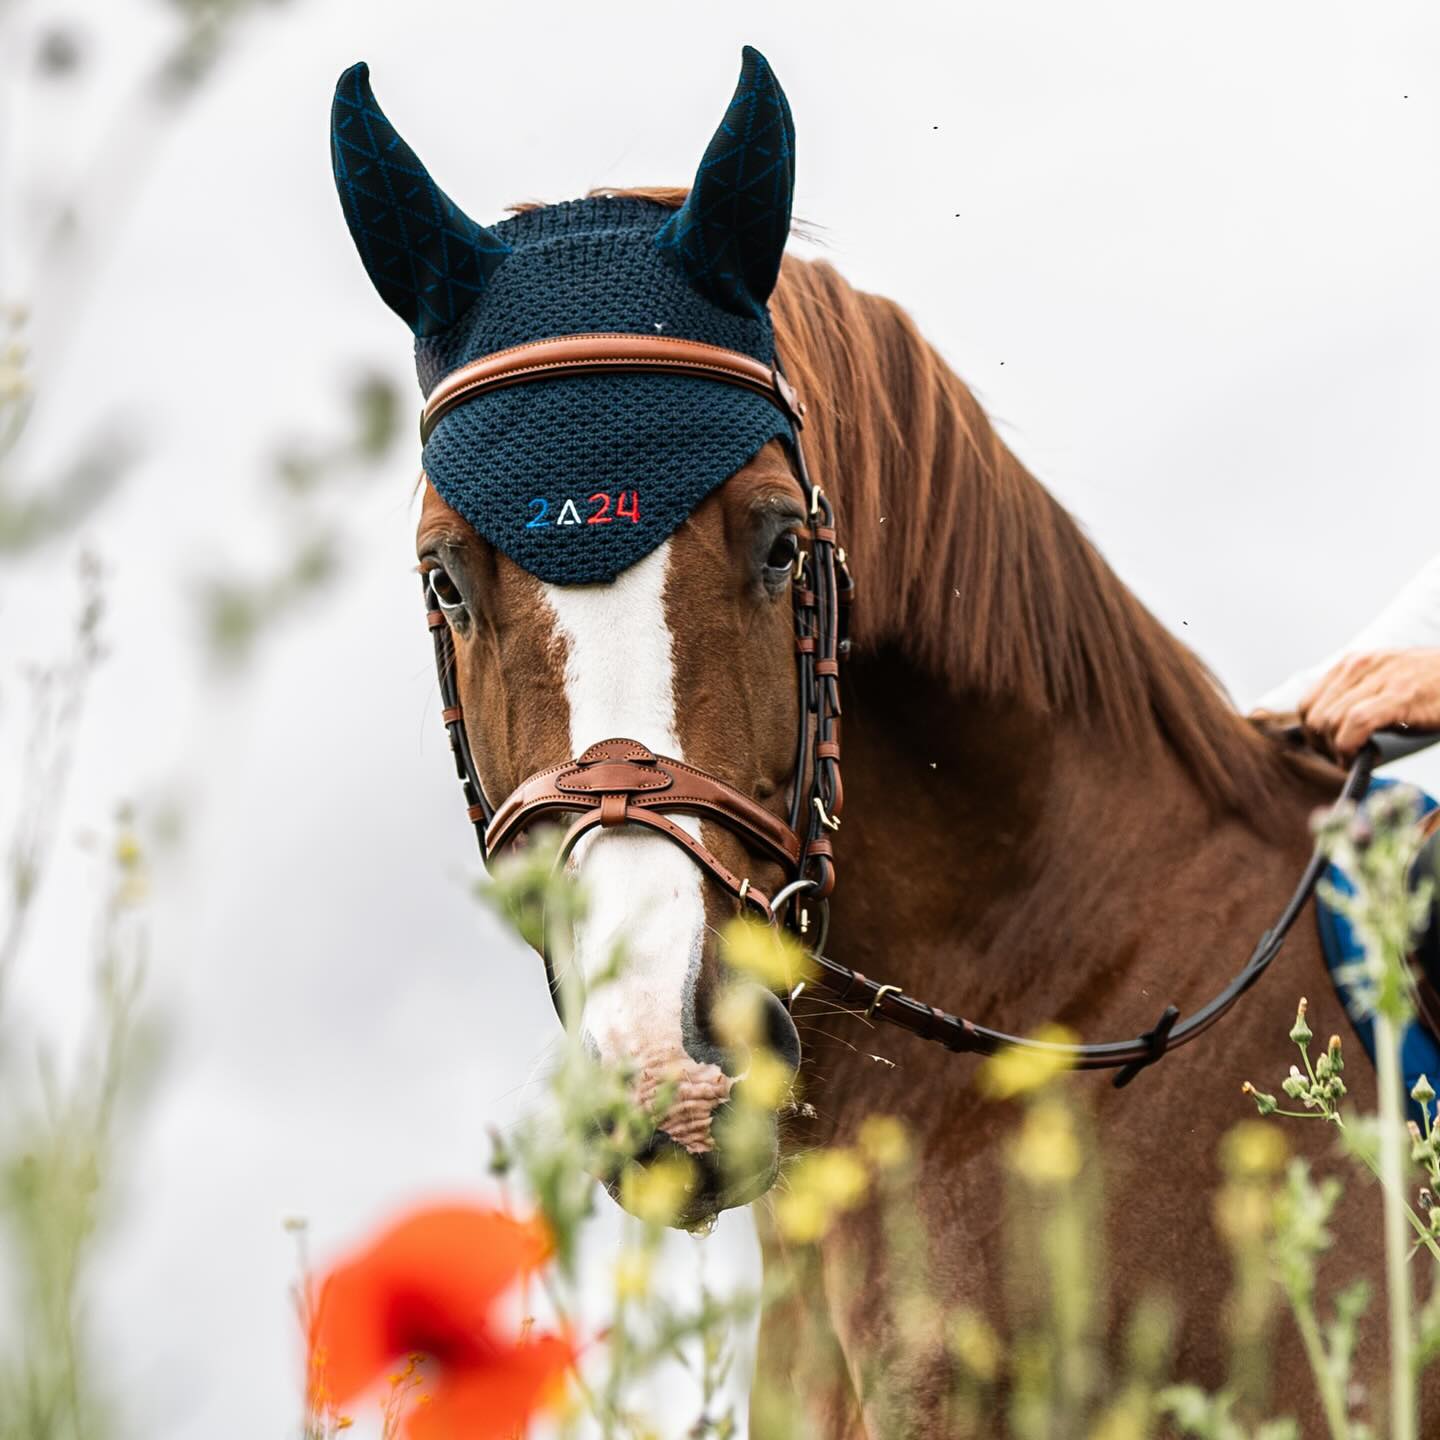 Nearly there…. 
📸 @hpalprod 
//
#tacante #serielimitee2024 #ridetoparis #equestrianstylz #earnet #bonnet #equestrianlife #madeinfrance #ecoresponsable